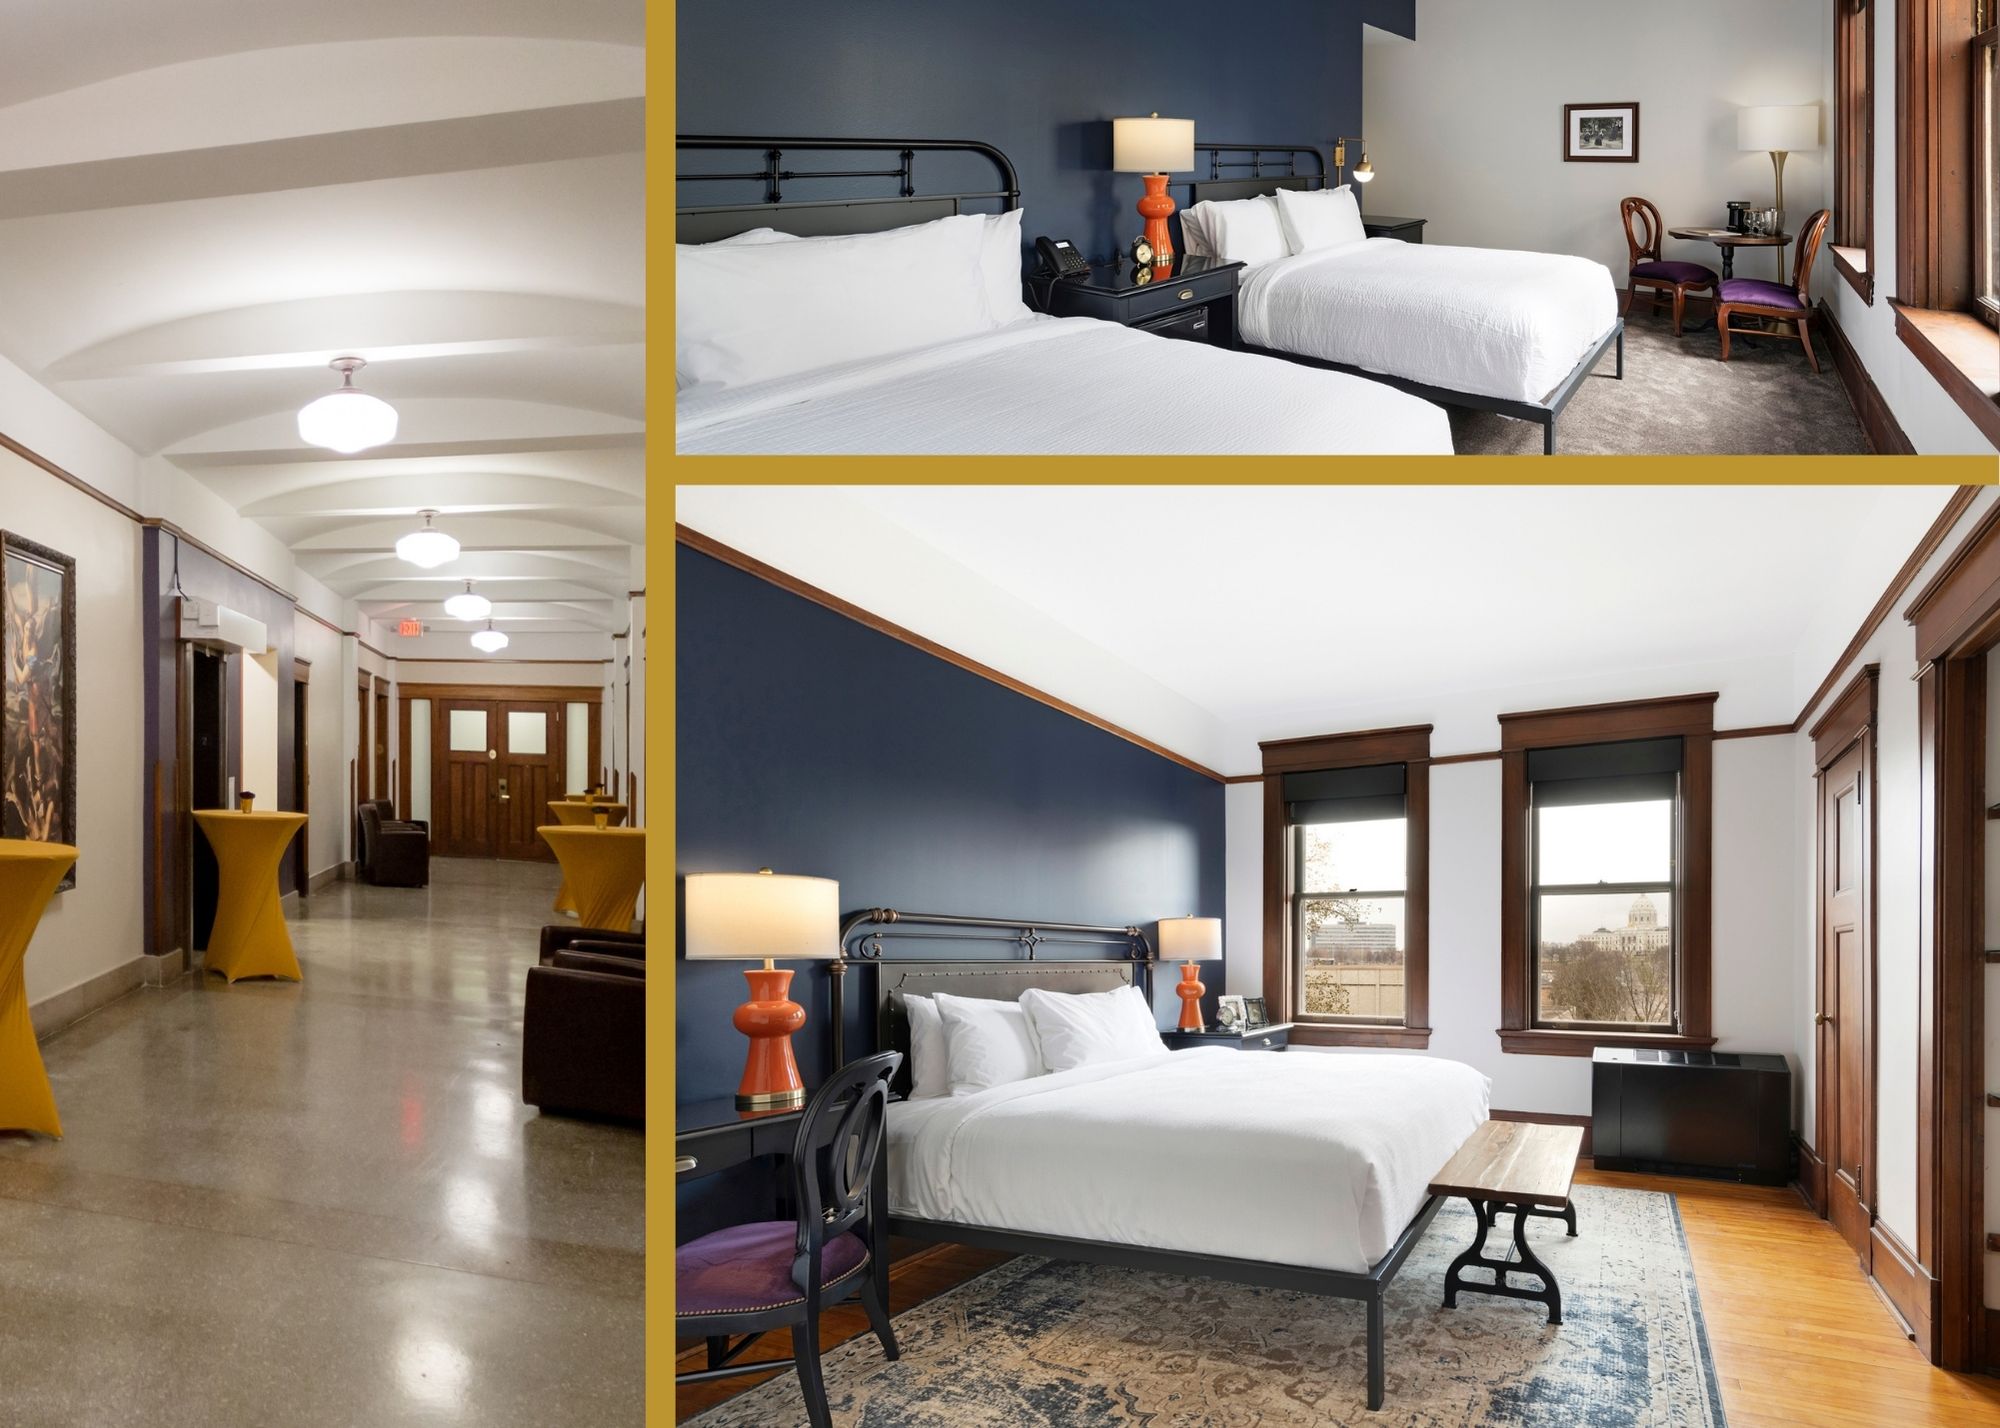 3rd through 6th floor hotel room buyout at Celeste of St Paul Hotel + Bar in Downtown St Paul MN